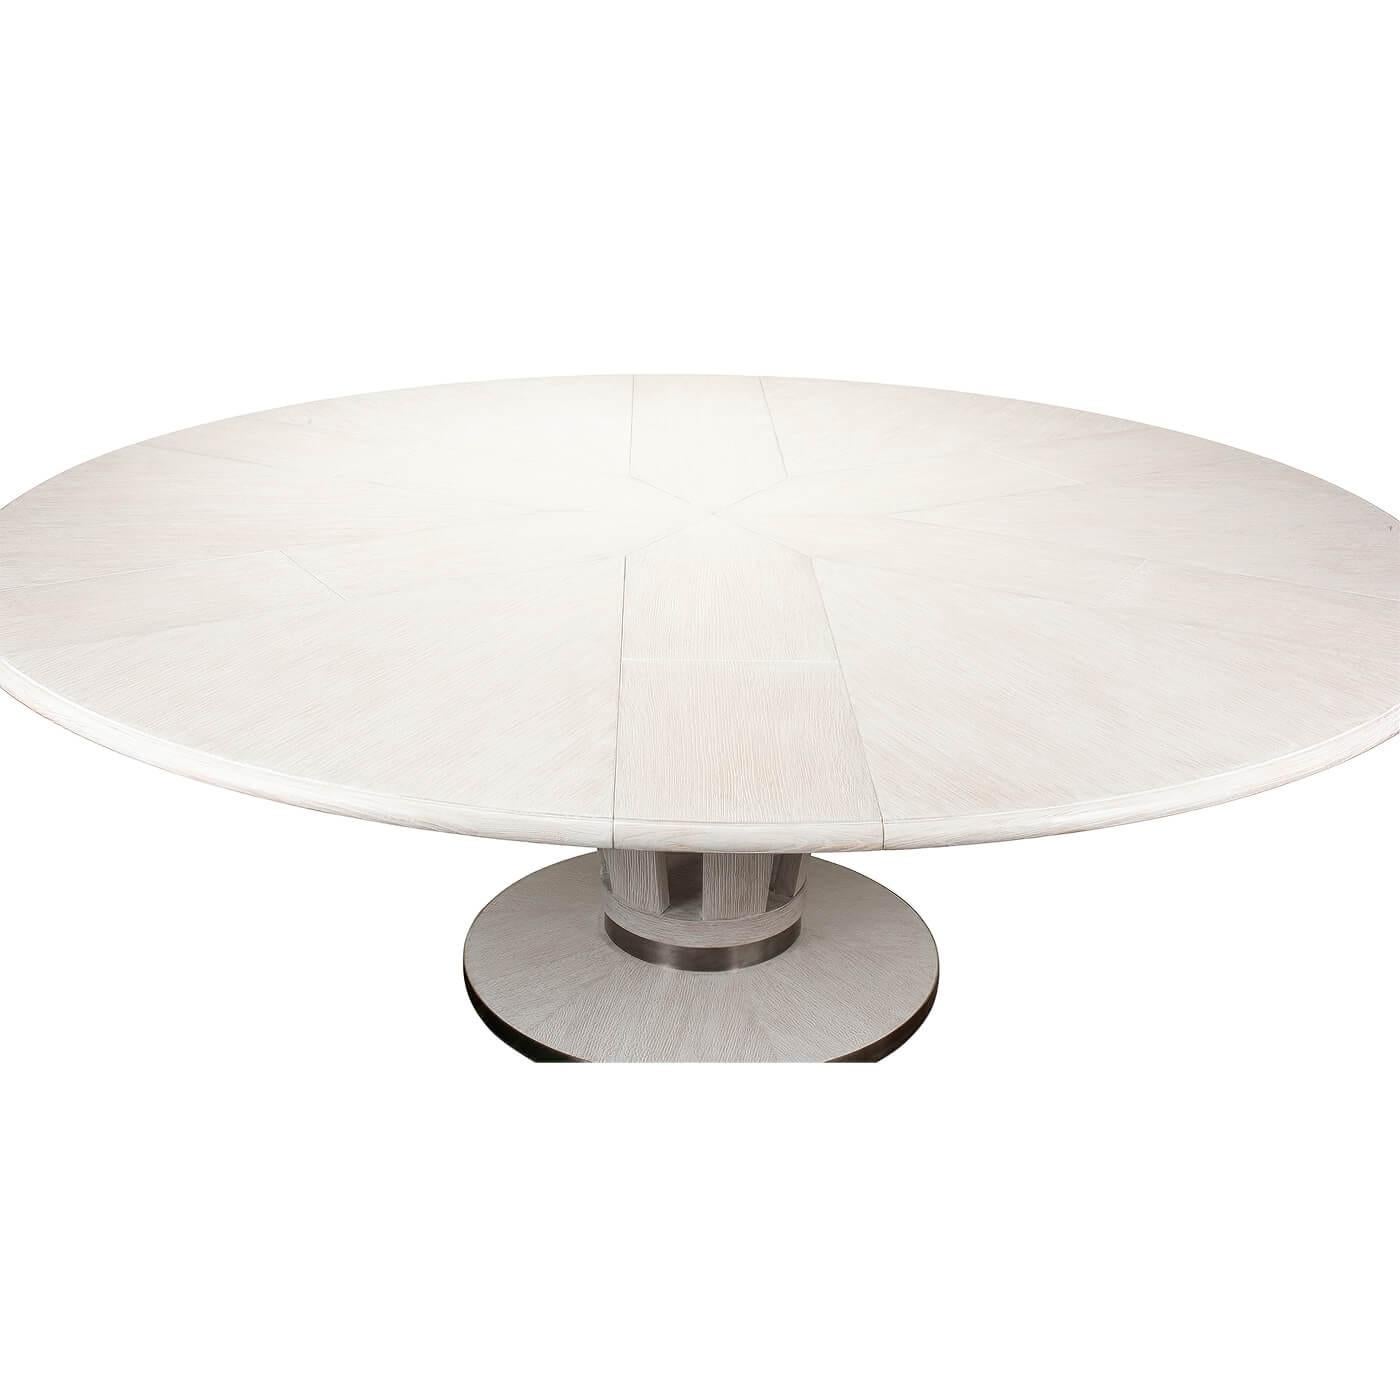 Contemporary Mid Century Style Extension Dining Table - White Wash